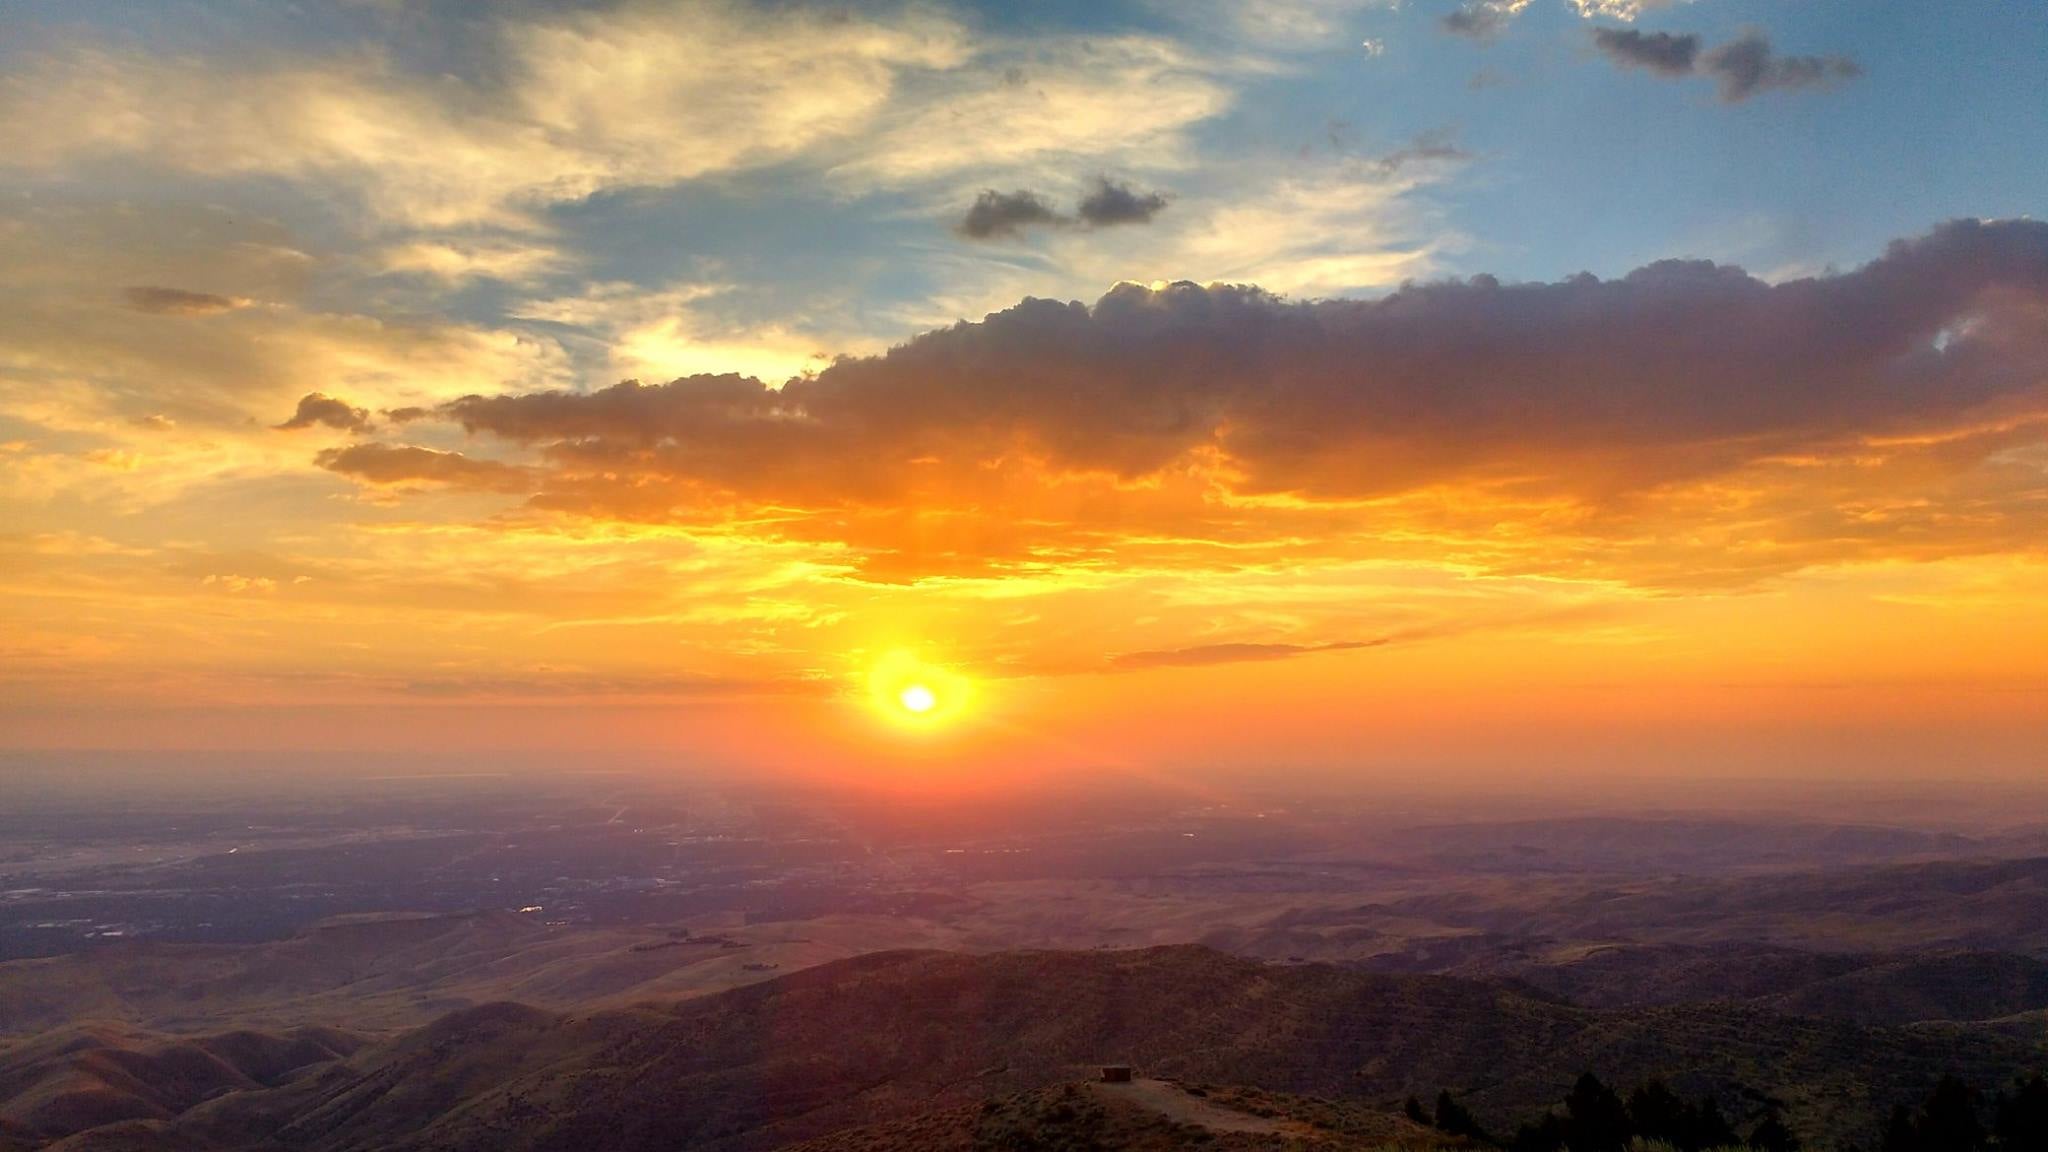 the the view from Lucky Peak looking down over Boise as the sun is setting casting hues of yellow, orange and pink on the clouds over a city